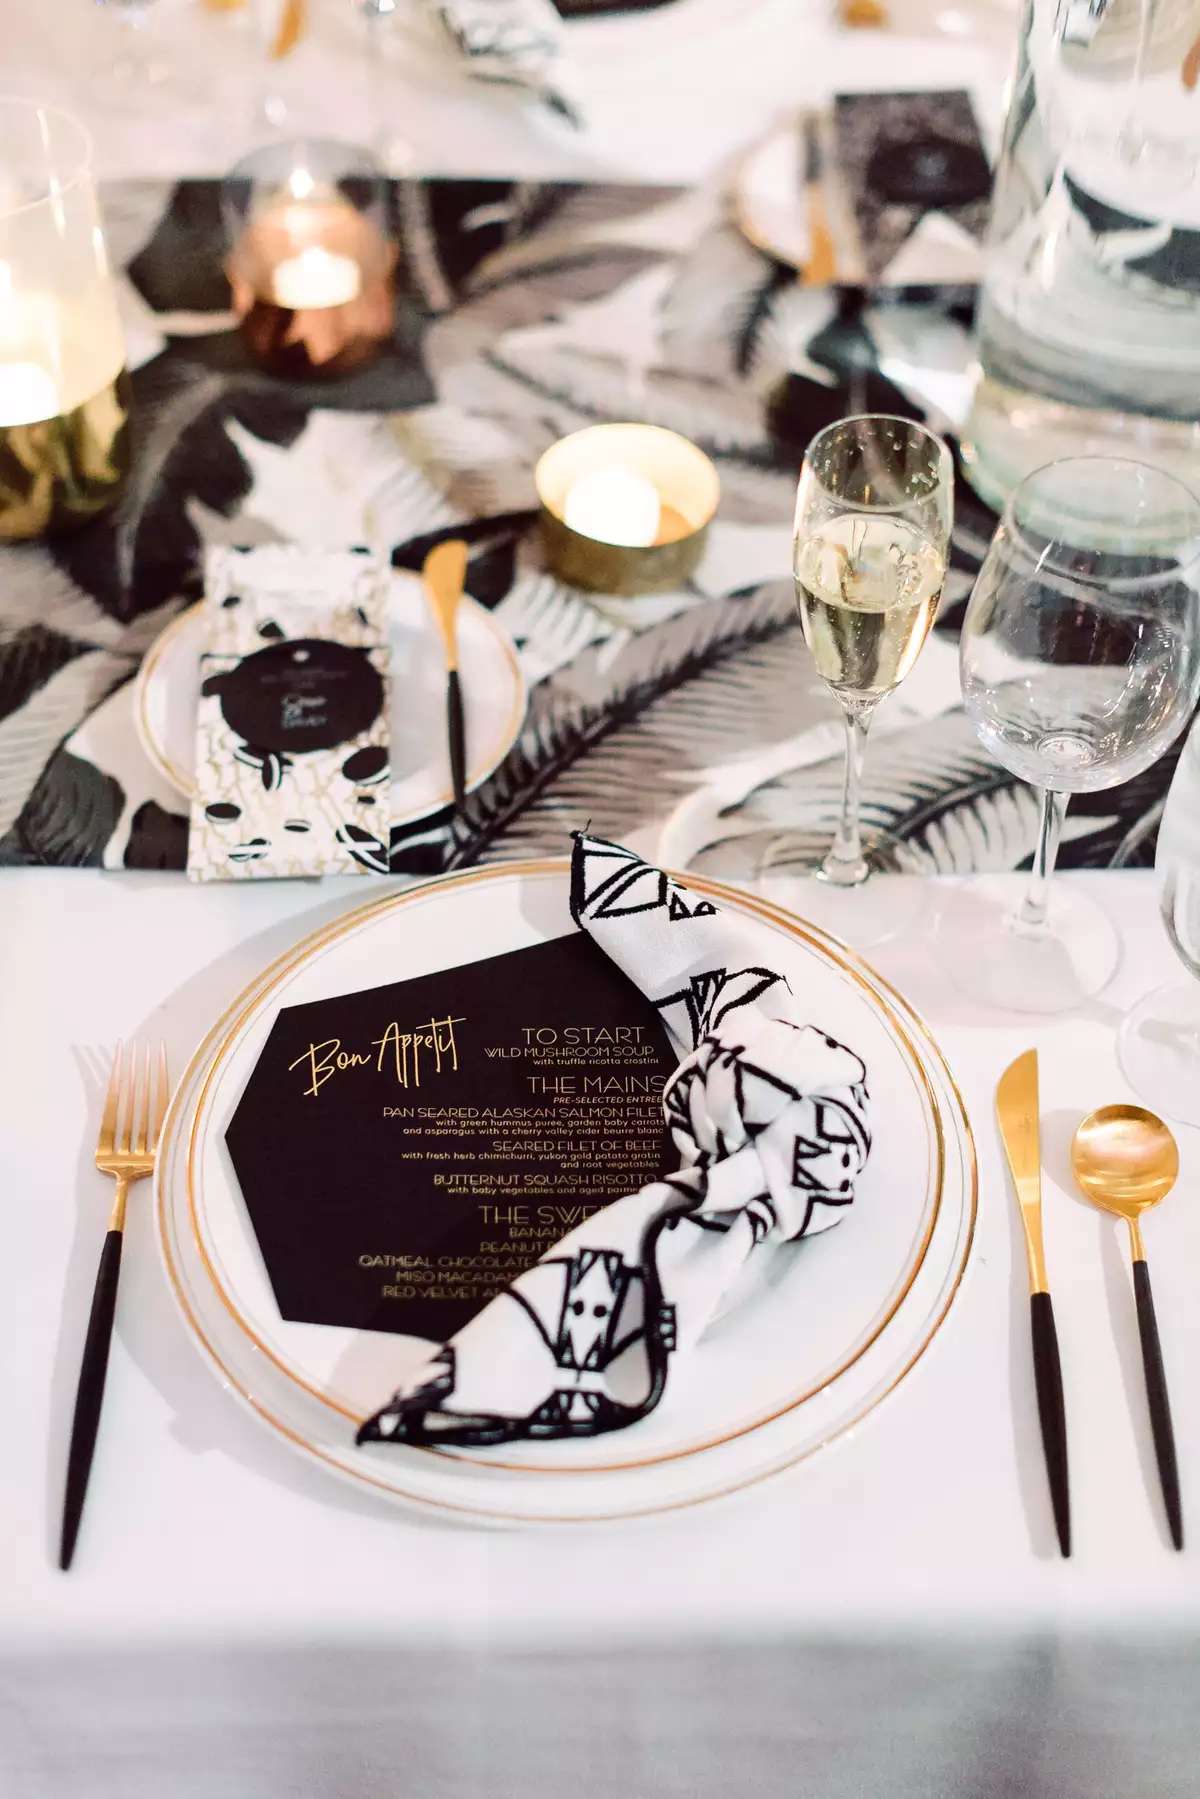 Wedding tablescape with patterned black and white napkin, black menu, and palm leaf print runner